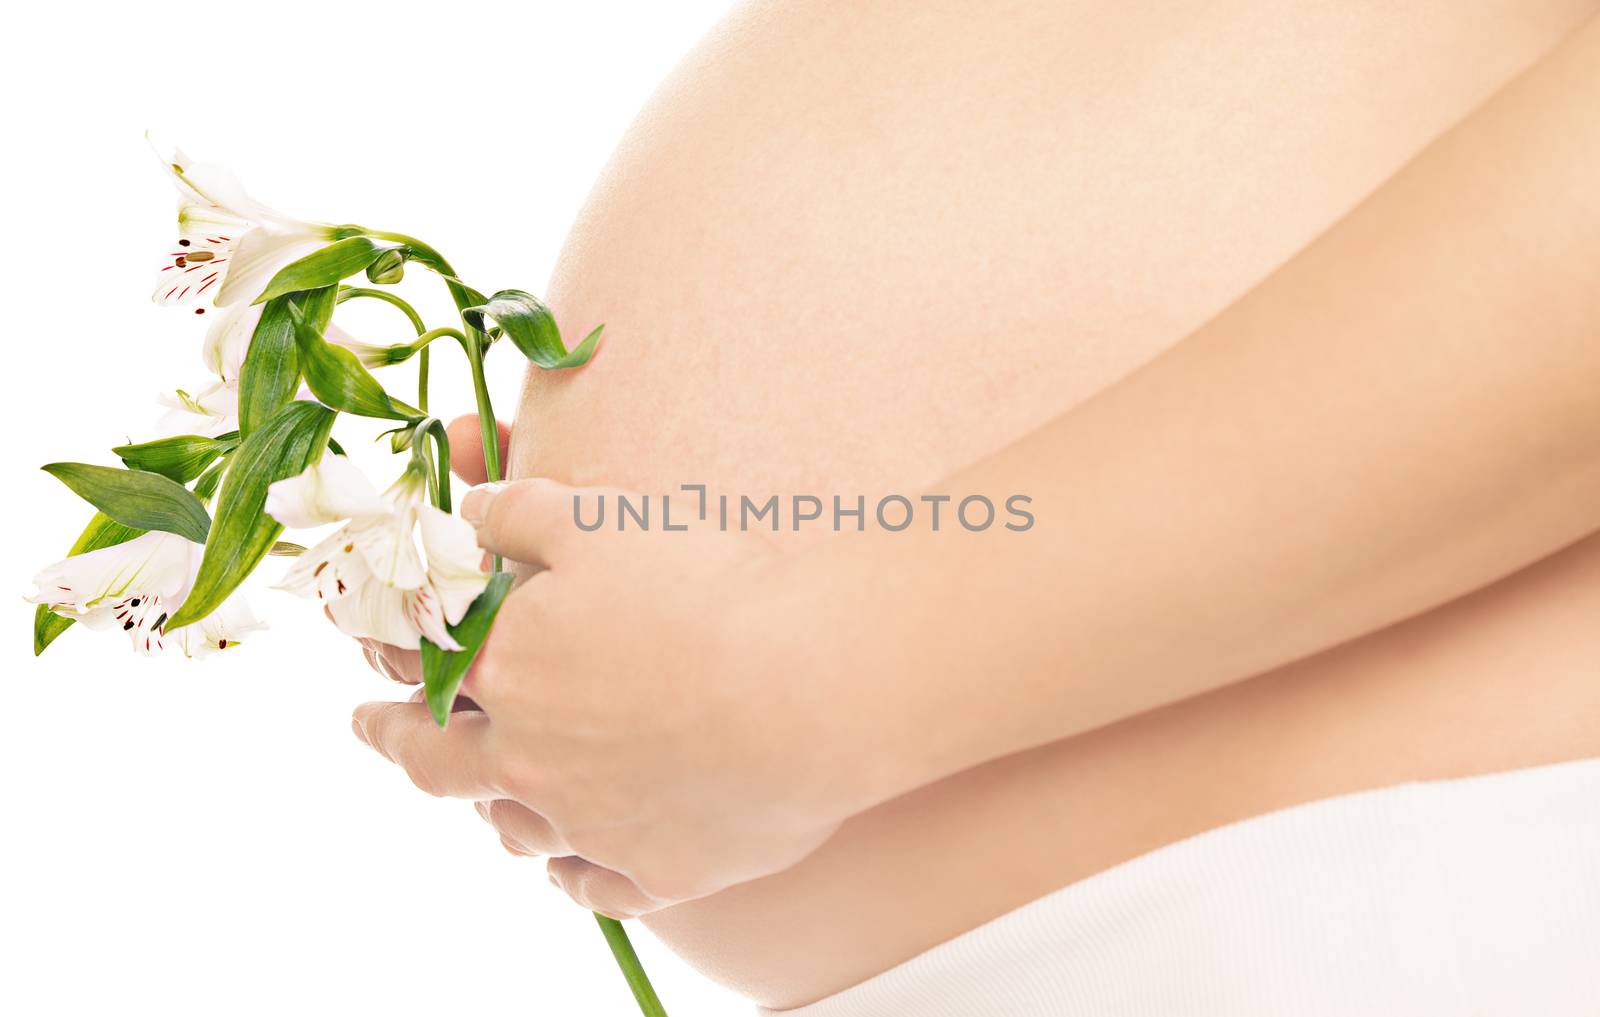 Pregnant woman is holding white jentle flower infront of her abdomen on white background, isolated with work path.